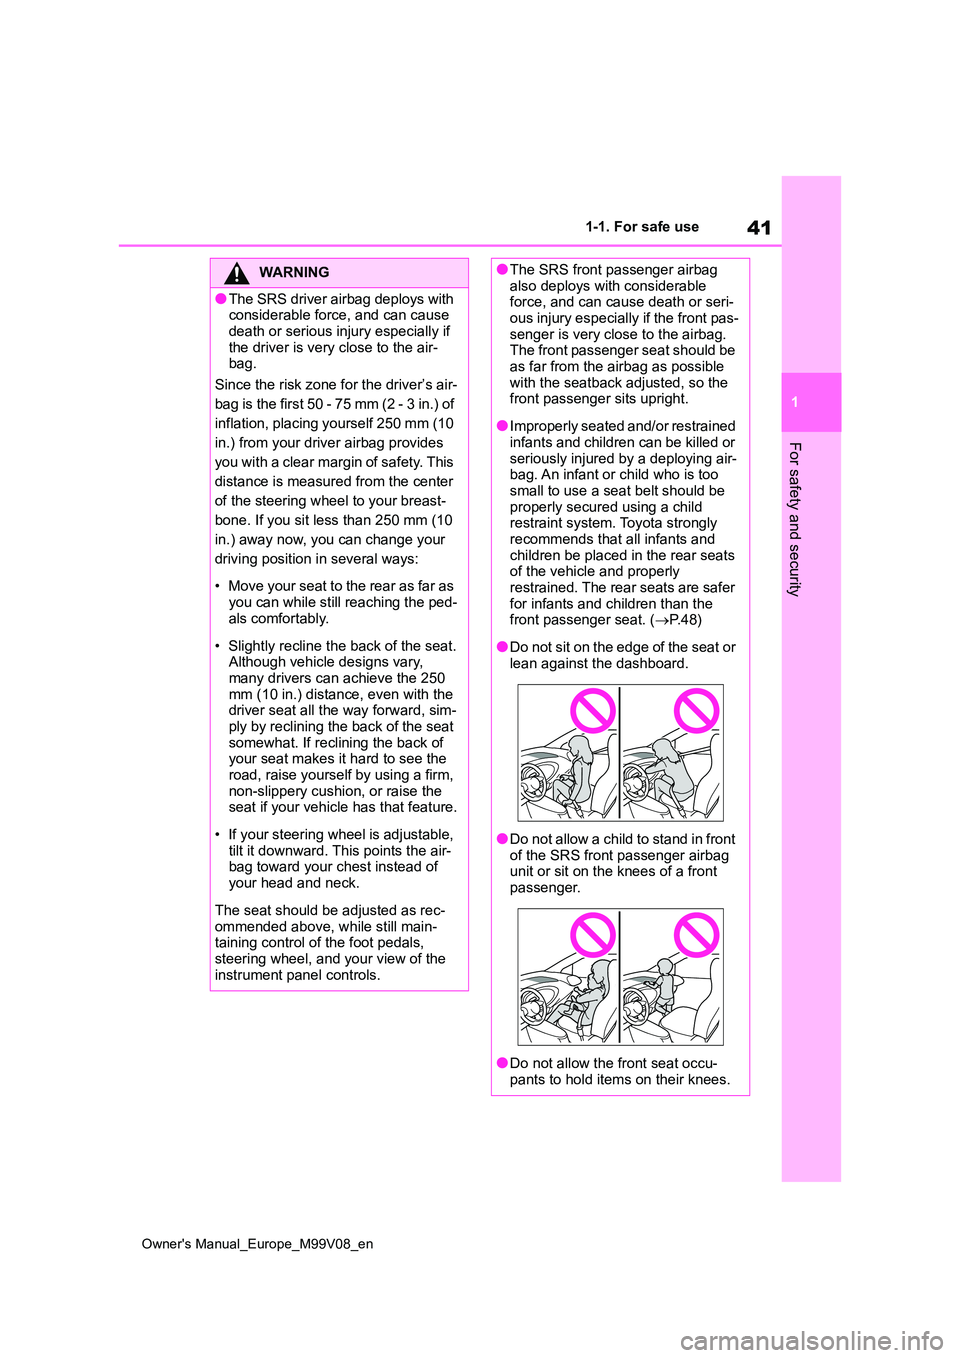 TOYOTA AYGO X 2022  Owners Manual (in English) 41
1
Owner's Manual_Europe_M99V08_en
1-1. For safe use
For safety and security
WARNING
●The SRS driver airbag deploys with  considerable force, and can cause  
death or serious injury especially